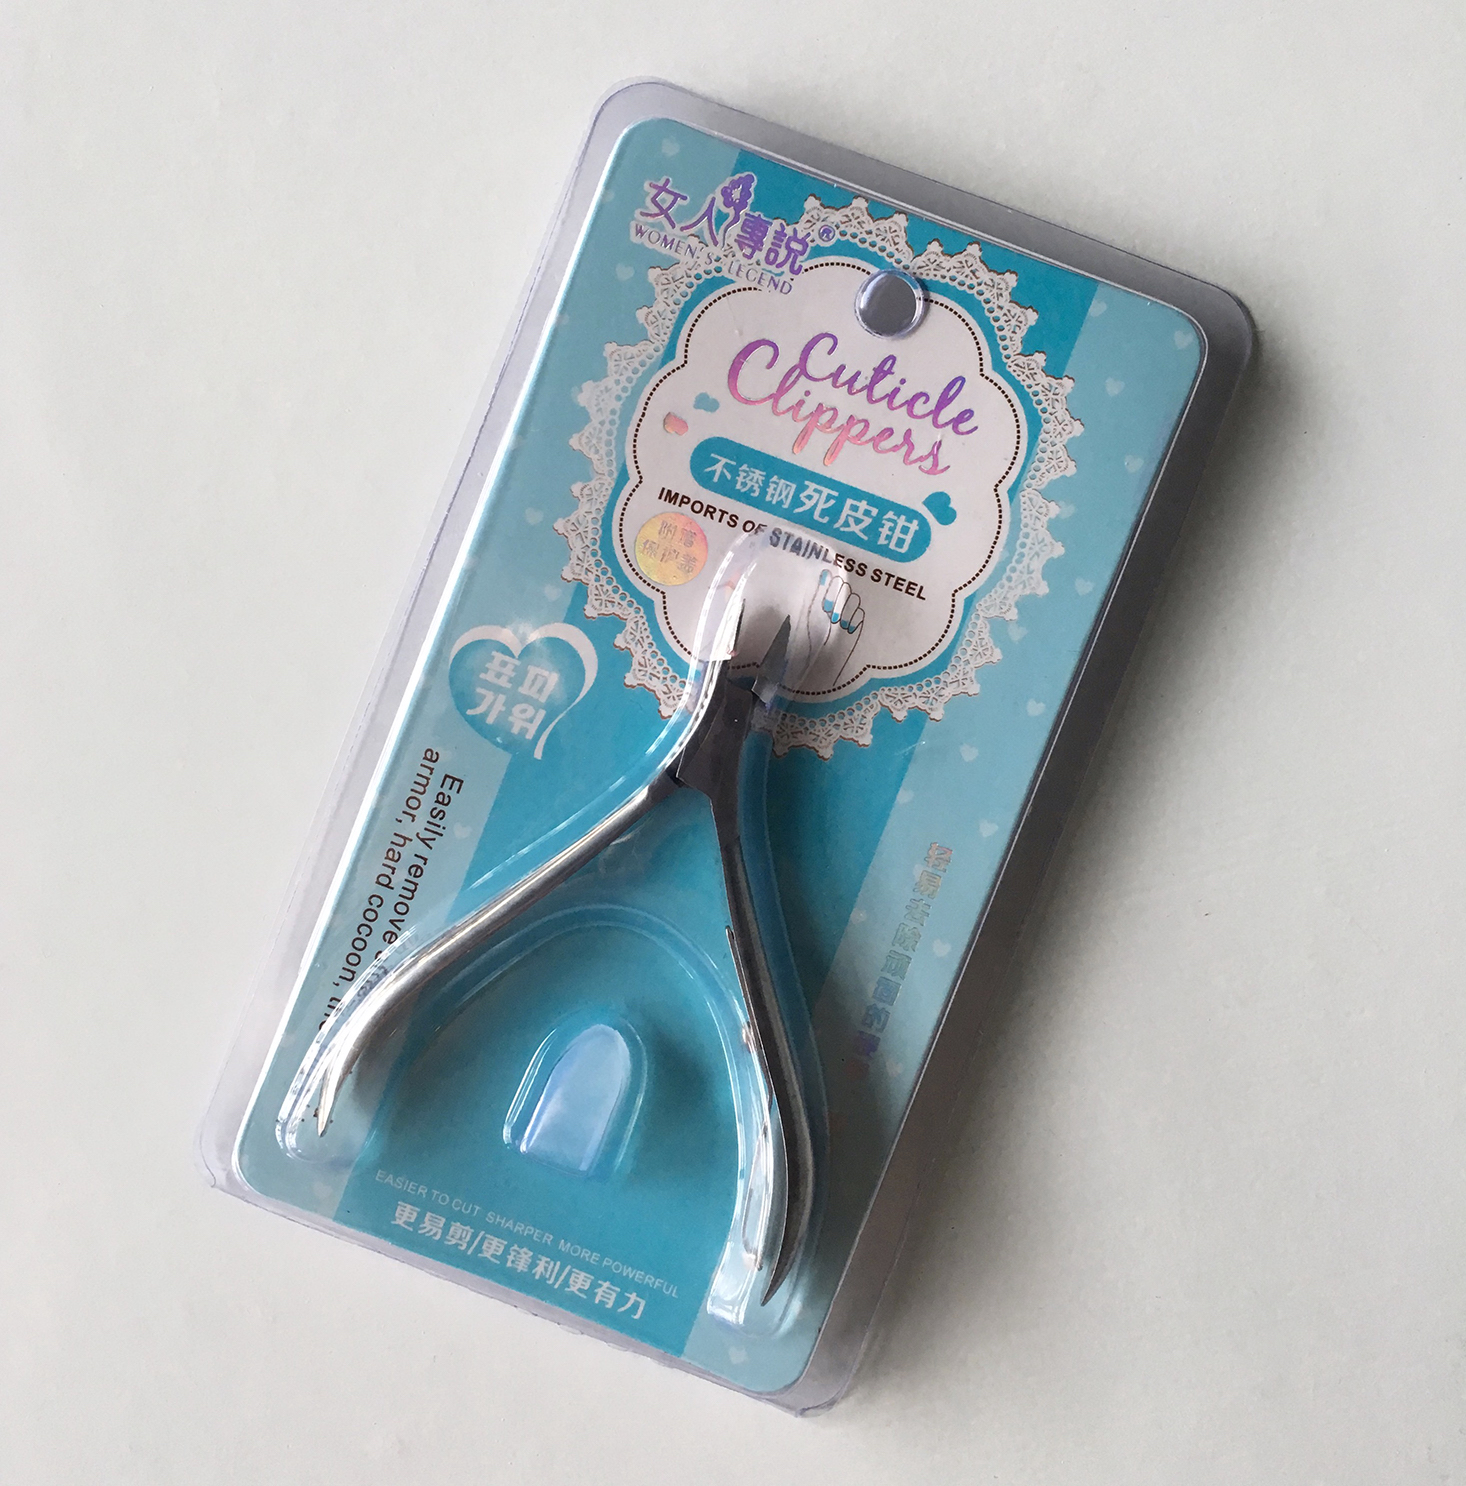 beauteque-bb-bag-november-2016-cuticle-clippers